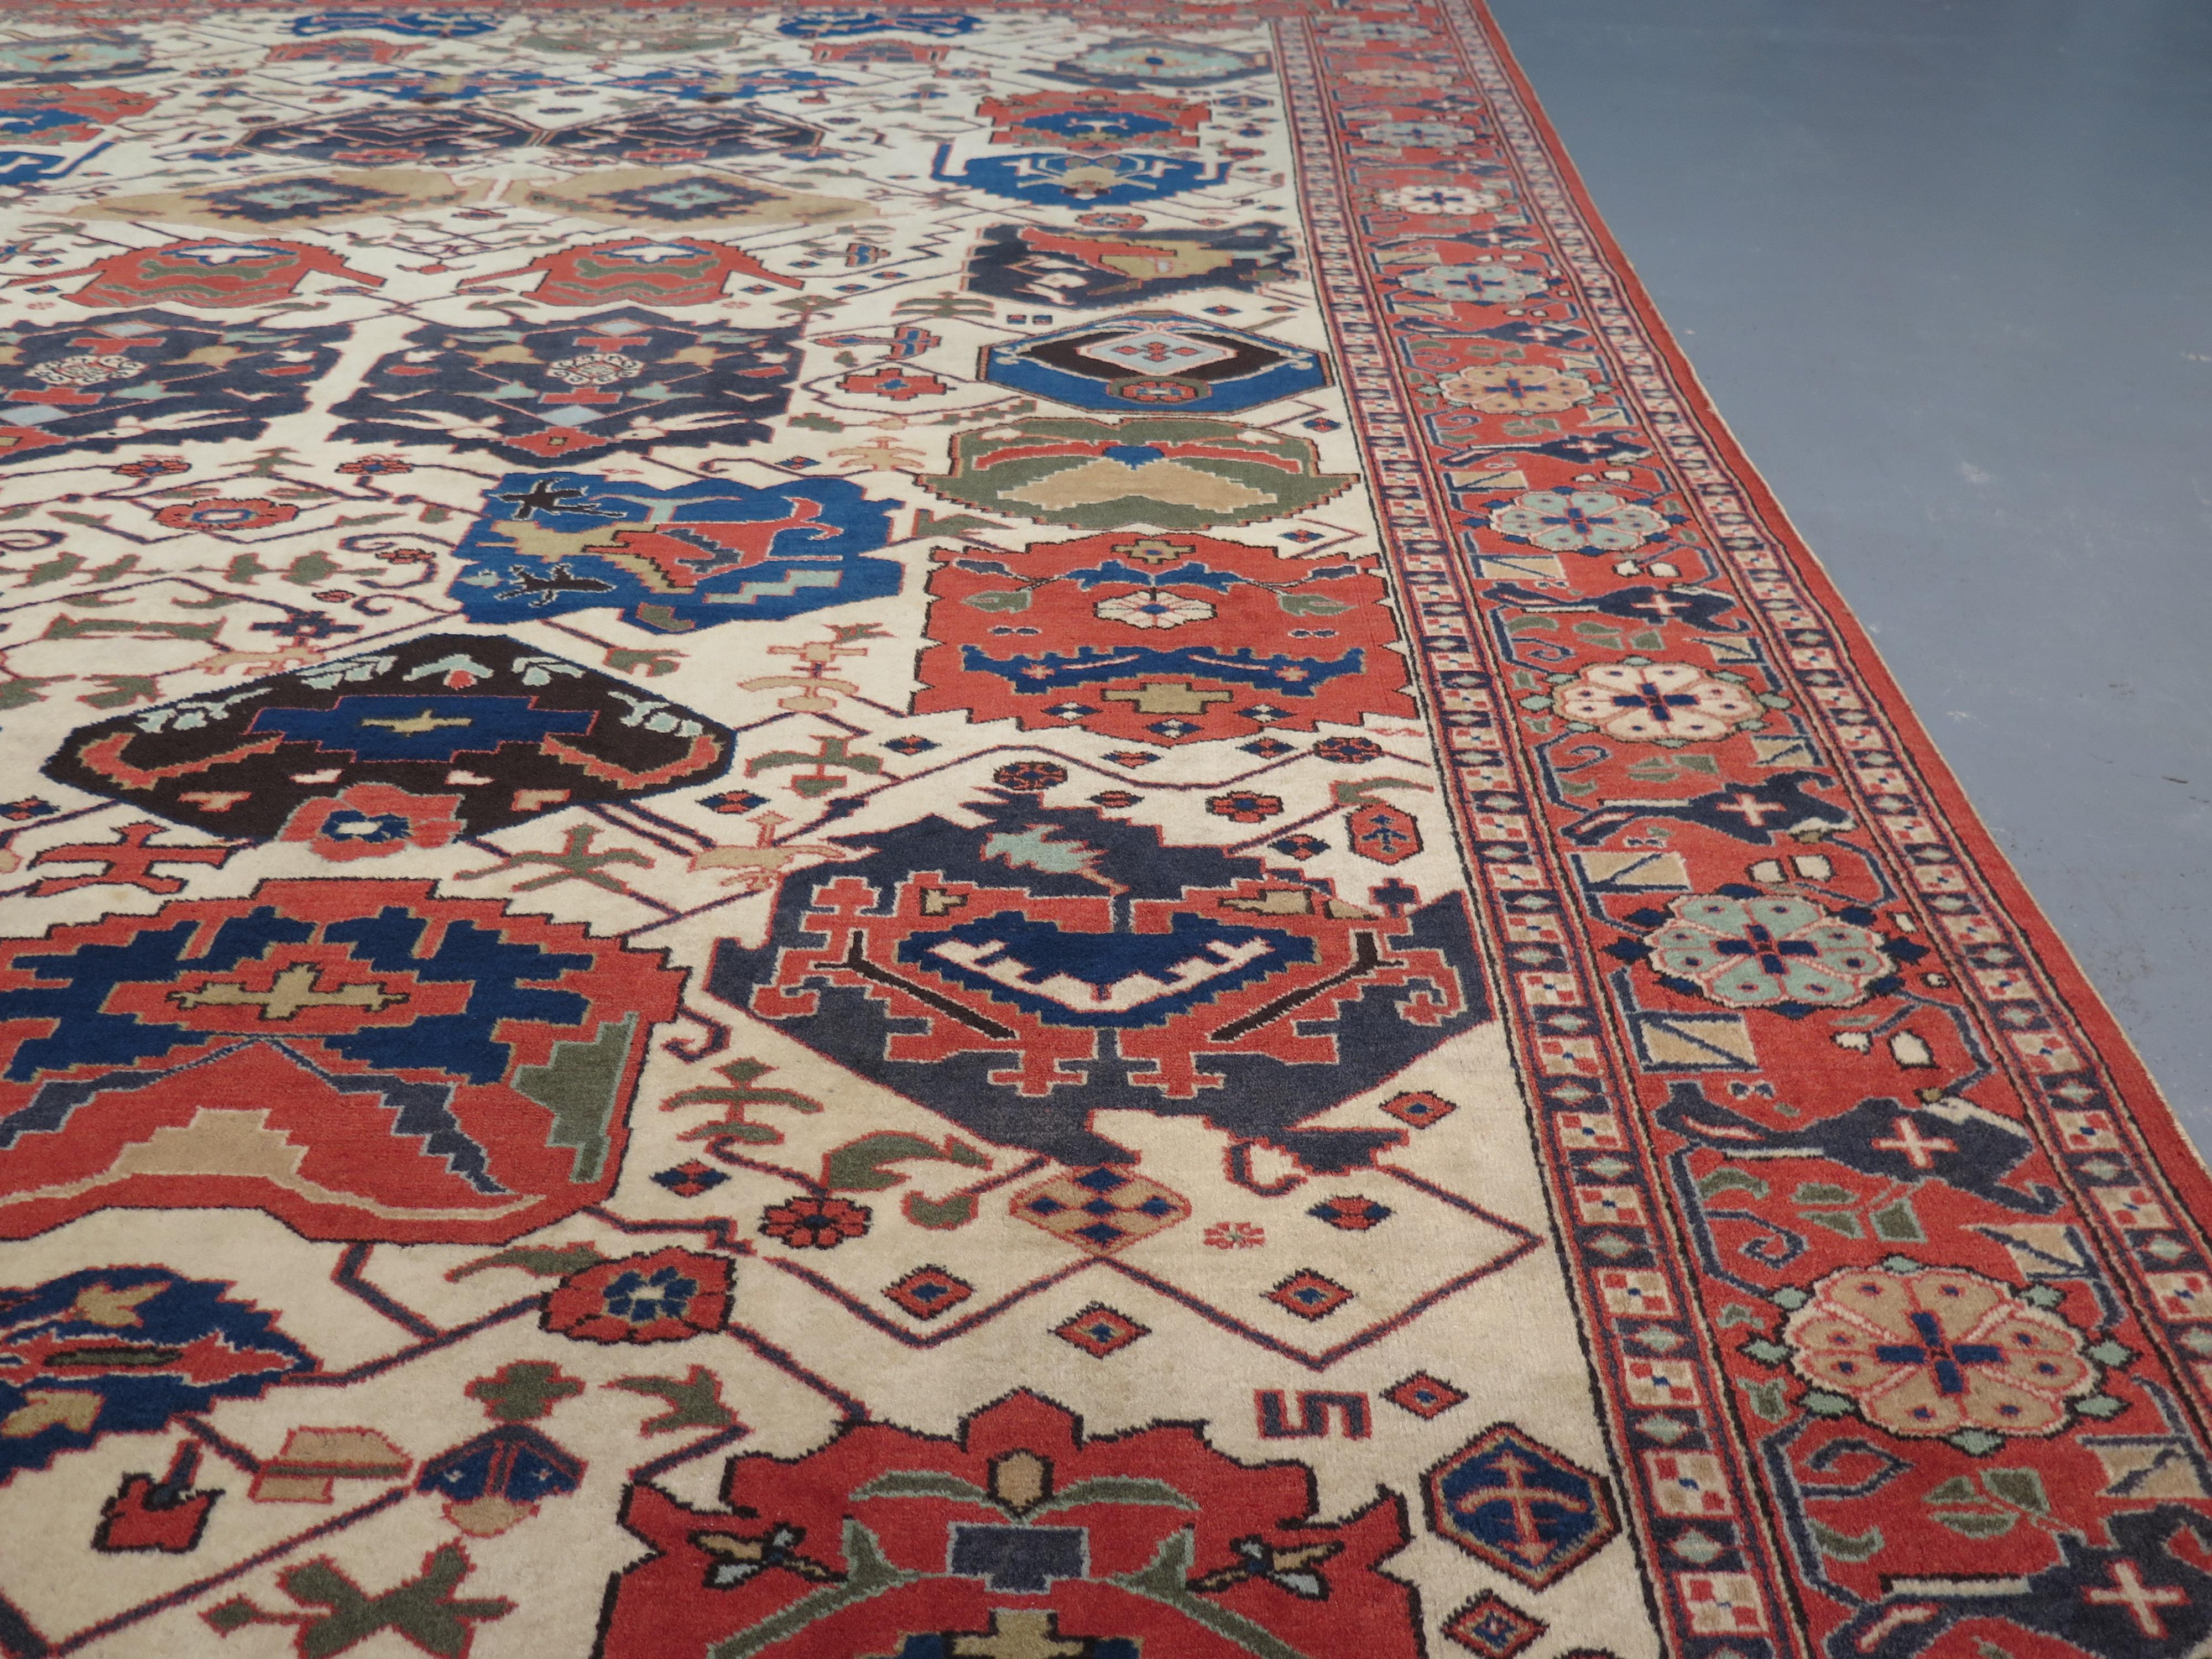 Azerbaijan has a rich history of rug weaving going back several centuries. Due to its geographic location, it stands at the crossroads of various cultures, and its carpets reflect this in their richness and beauty. As such, these pieces are highly